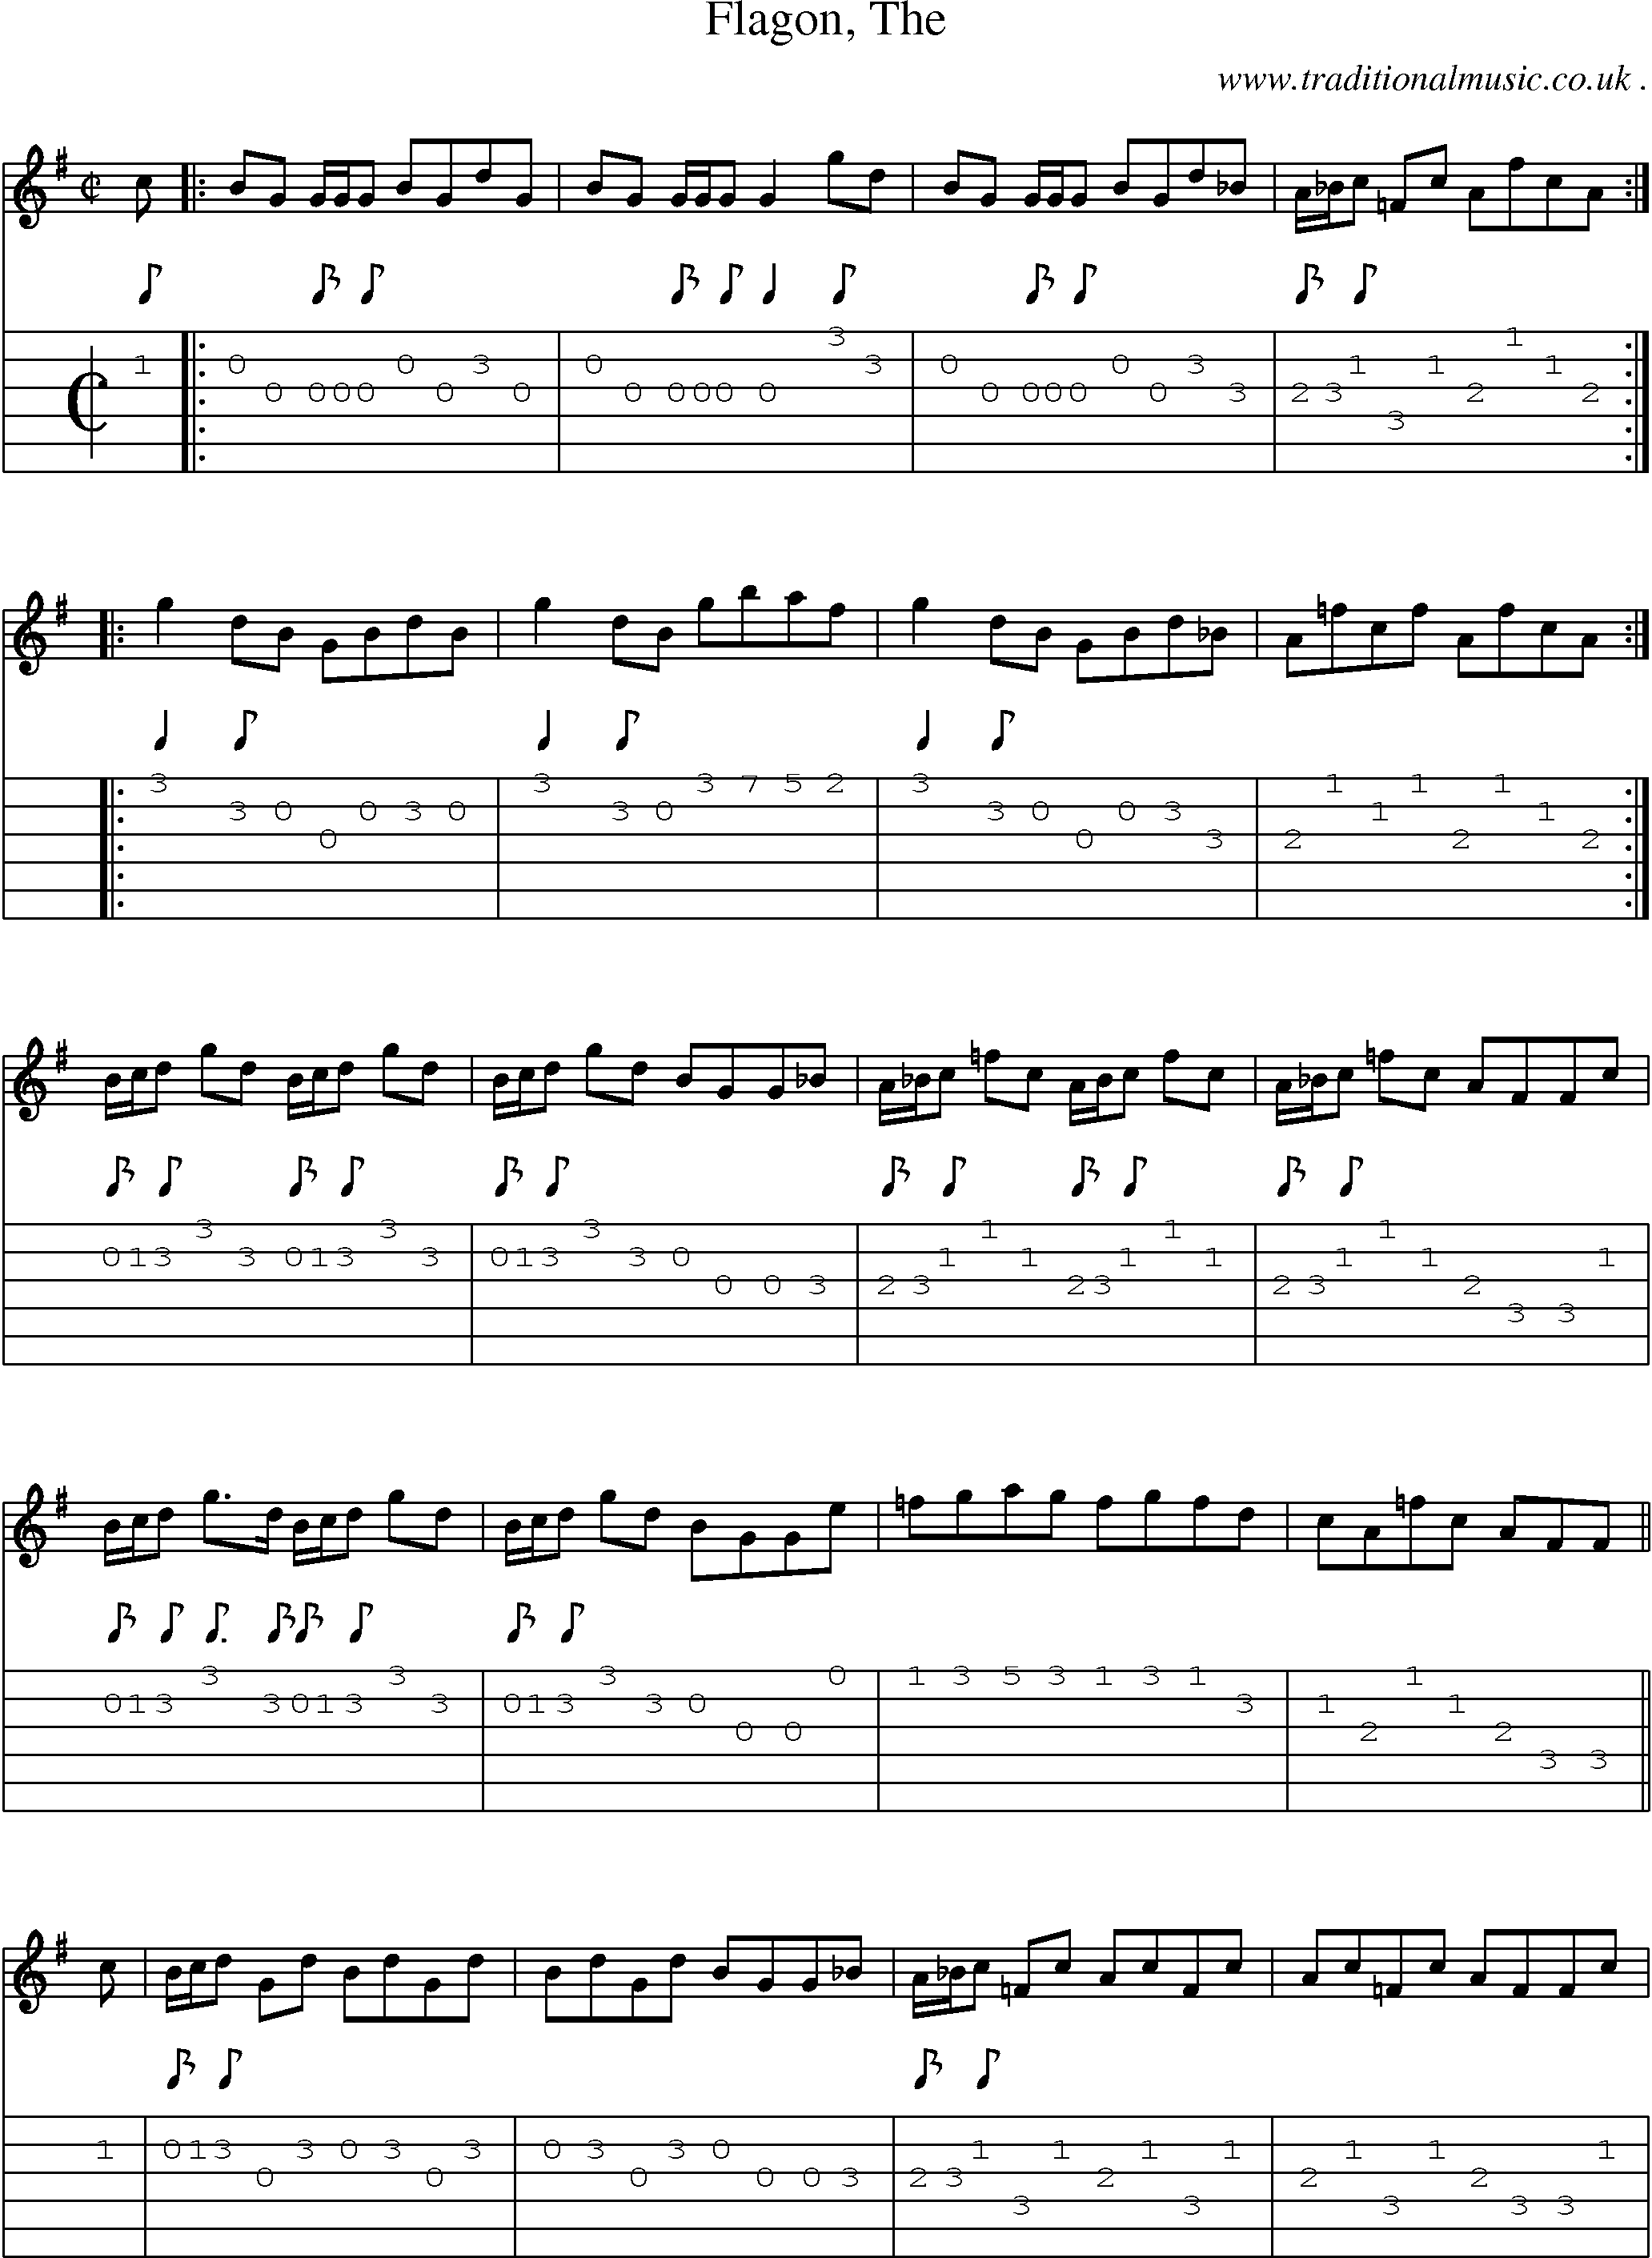 Sheet-music  score, Chords and Guitar Tabs for Flagon The